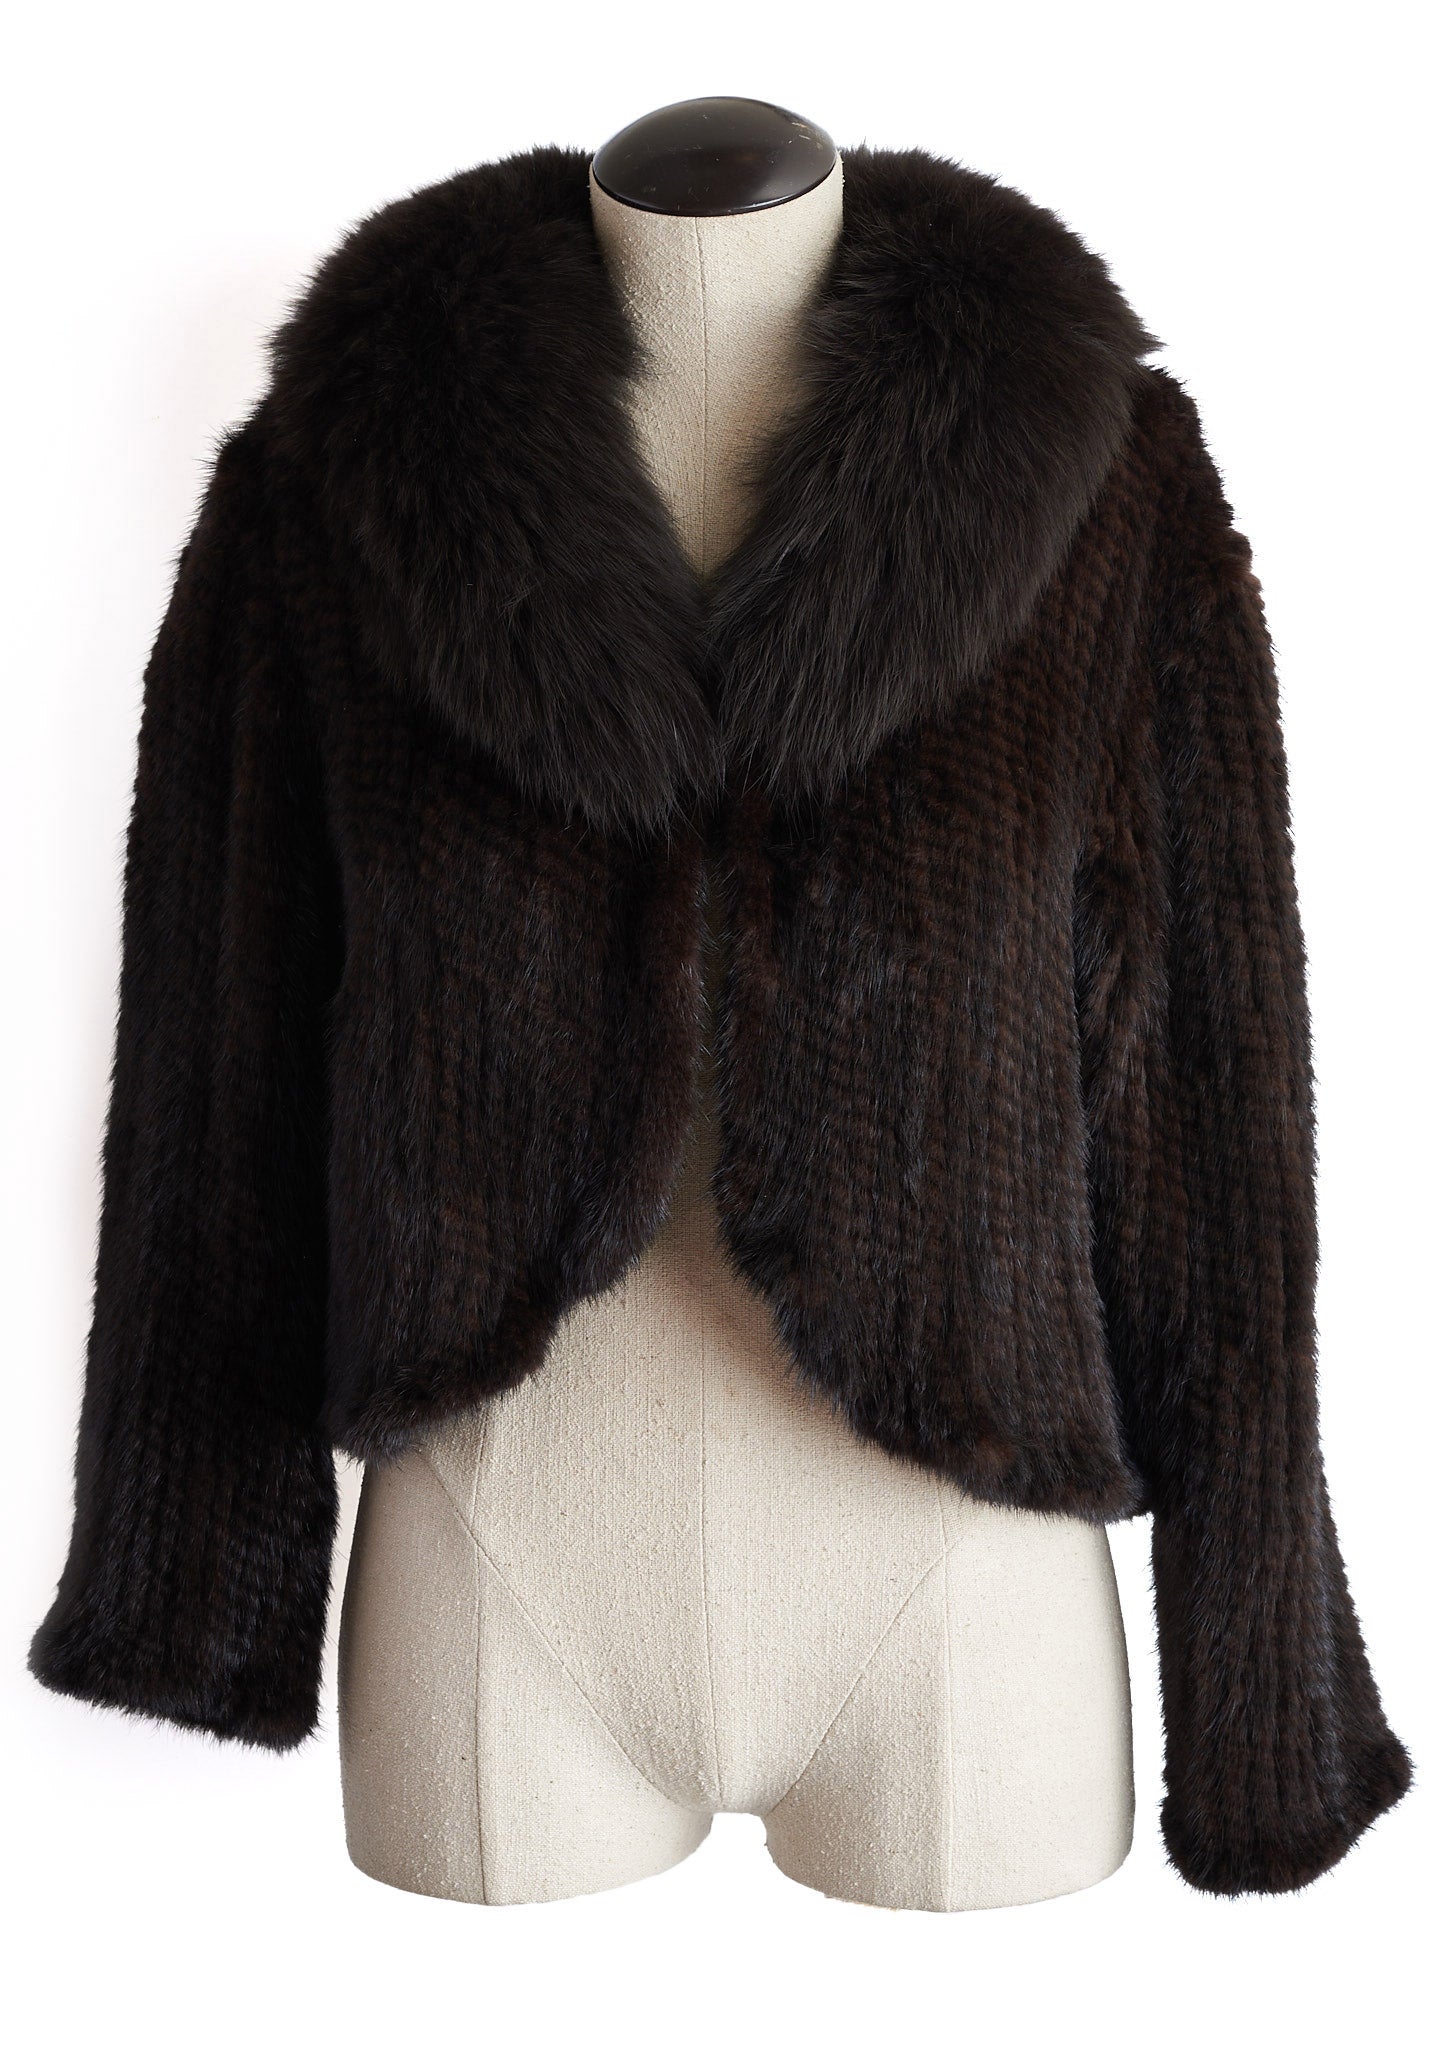 Blackglama Mink Coat with chanel collar